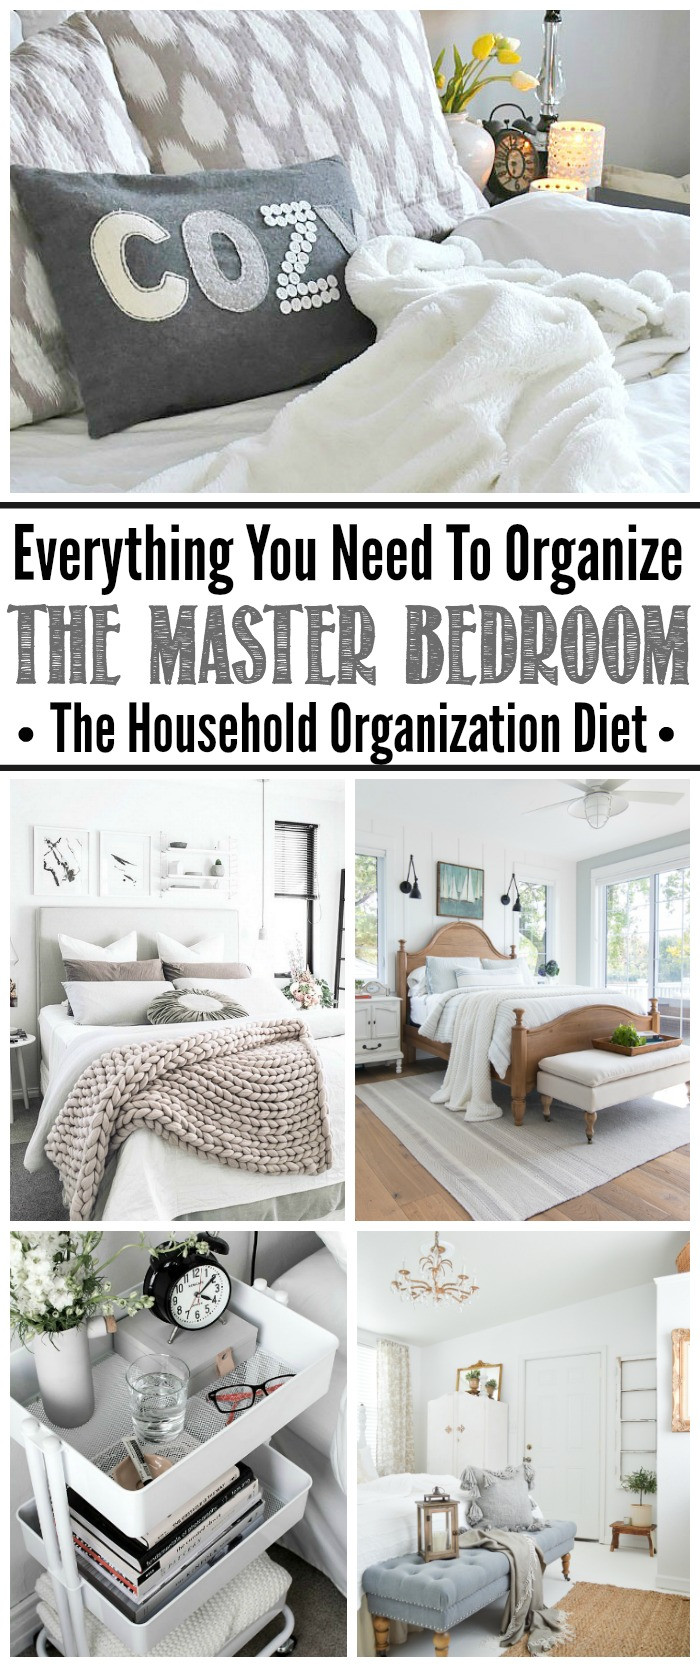 Bedroom Organization Tips
 How to Organize the Master Bedroom September HOD Clean